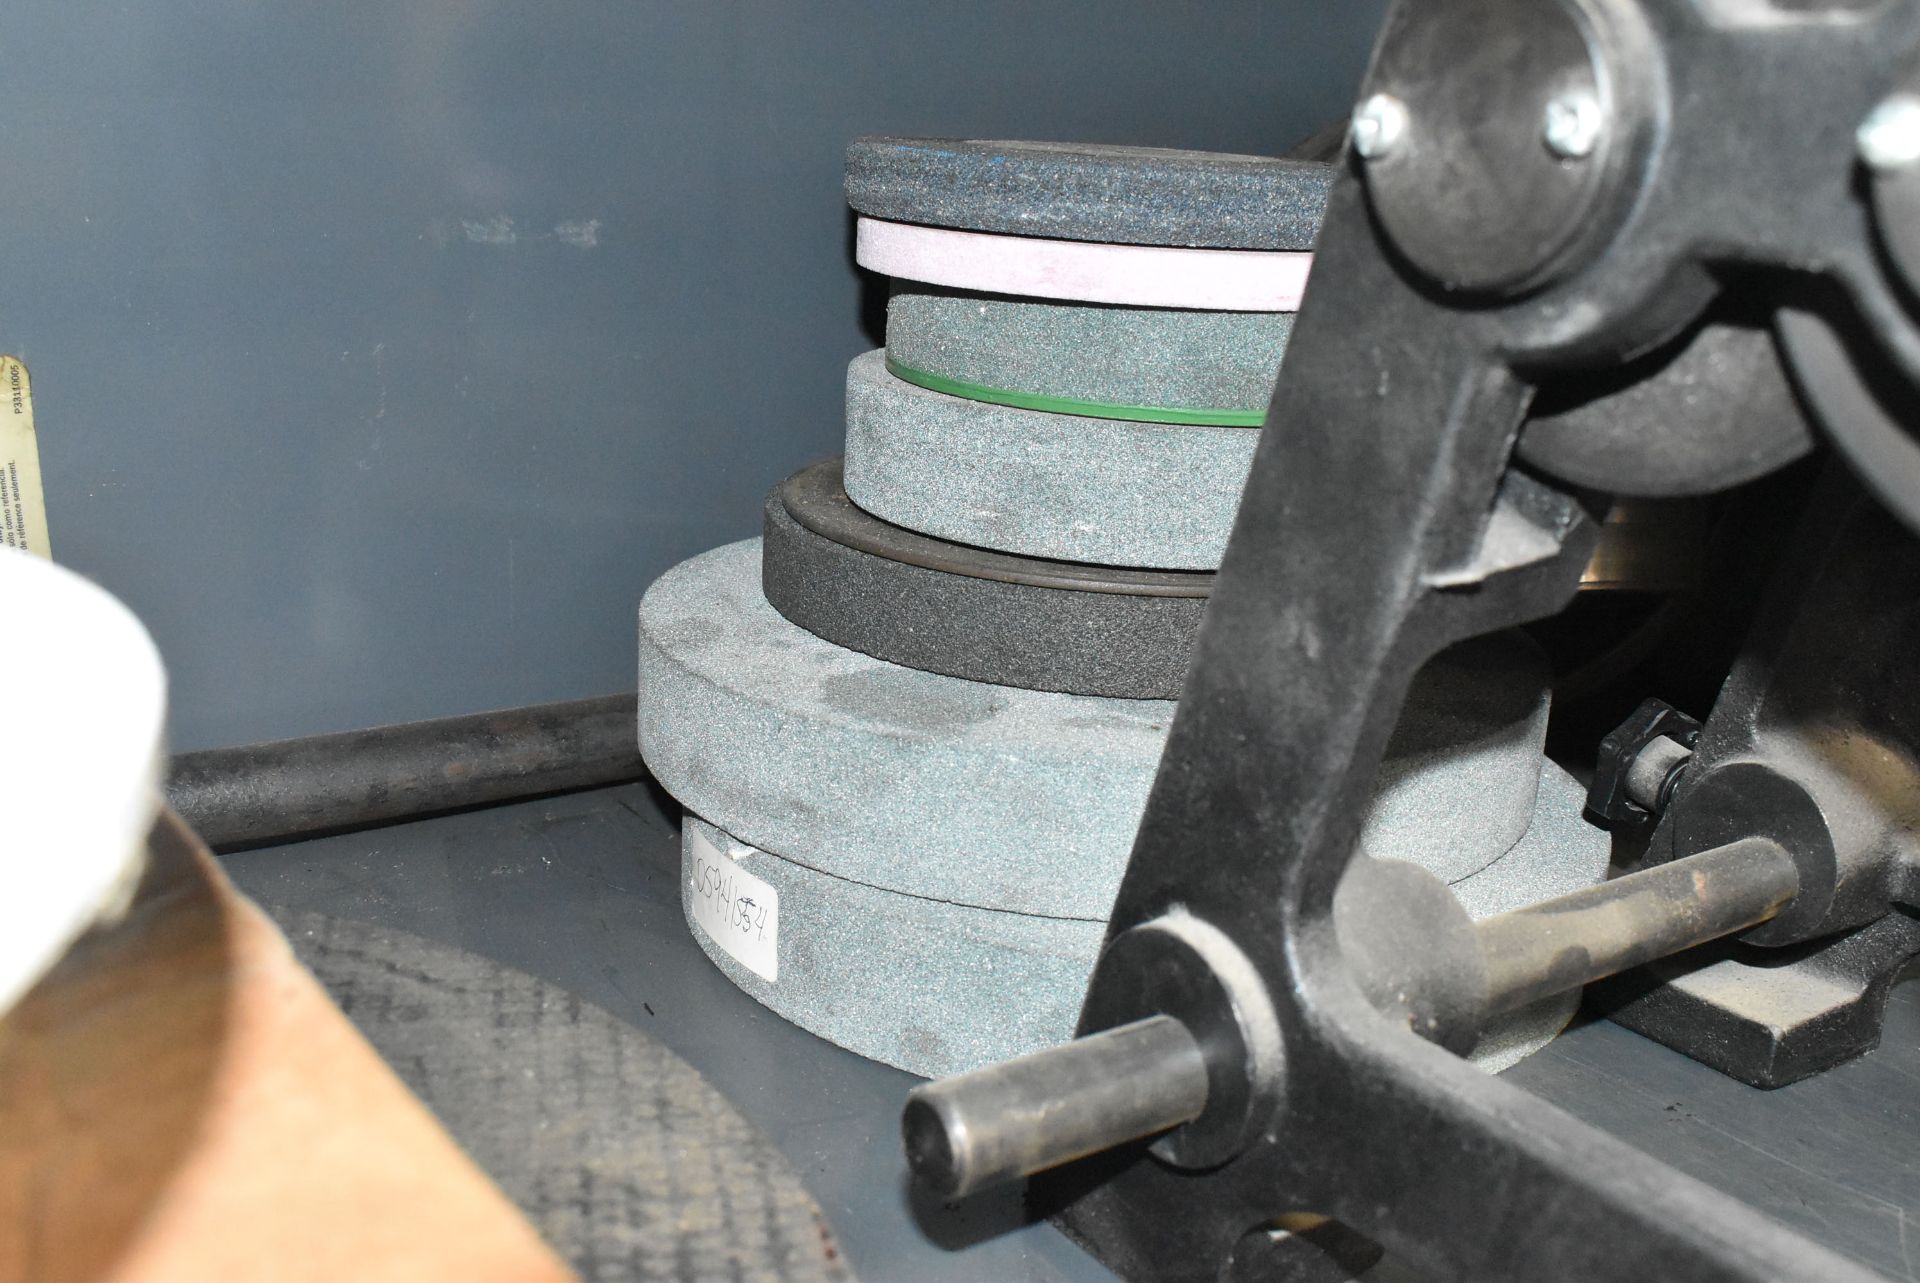 LOT/ CONTENTS OF SHELF - WHEEL BALANCER, ABRASIVE CUT OFF DISCS, WIRE WHEELS, GRINDING WHEELS, ANGLE - Image 4 of 5